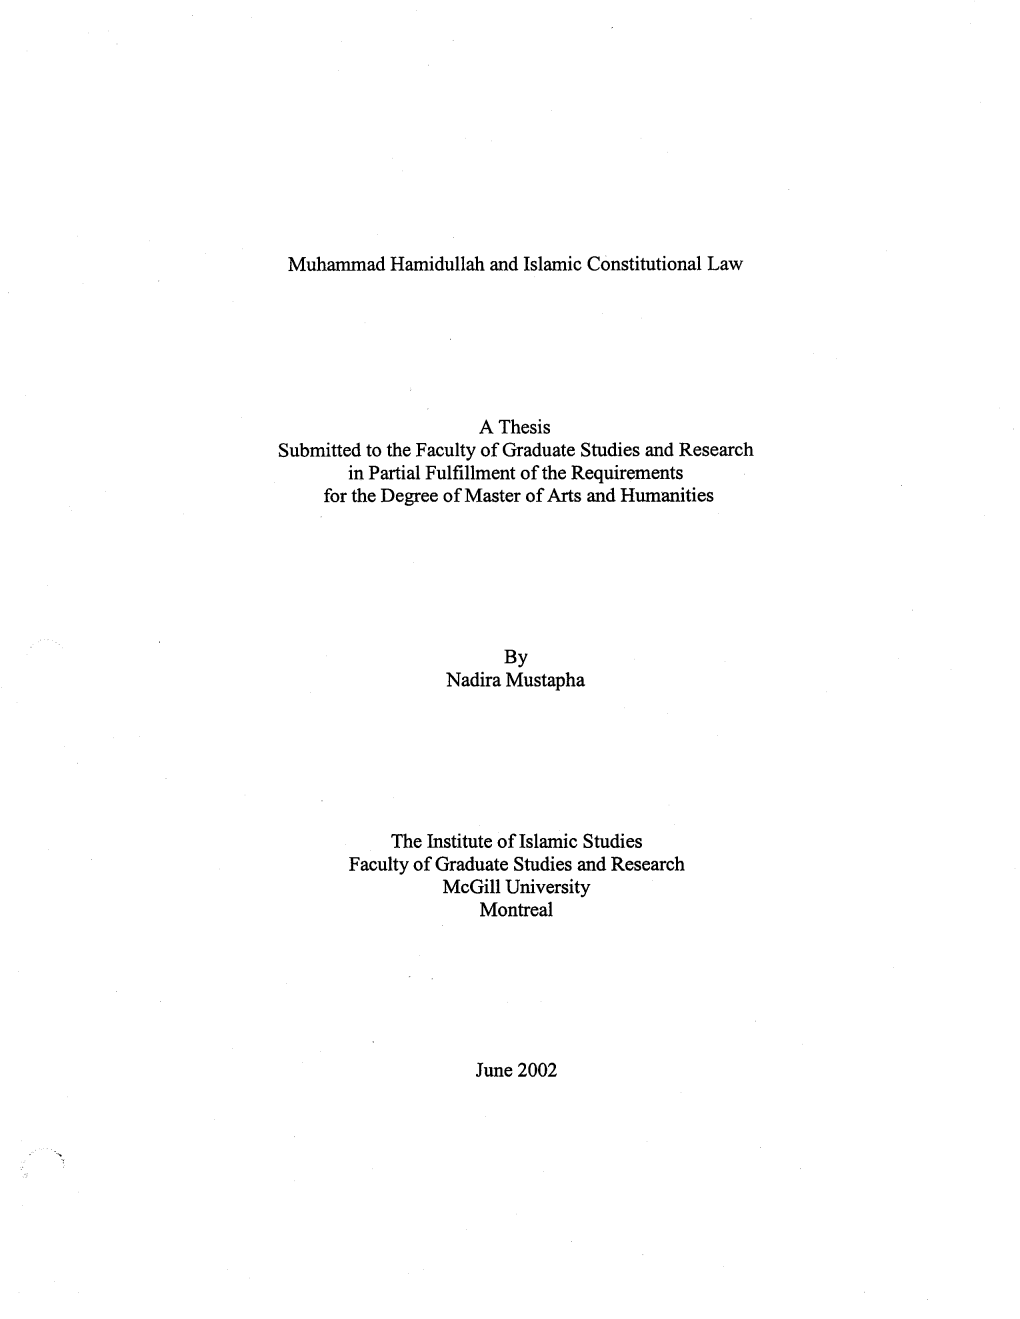 Muhammad Hamidullah and Islamic Constitutional Law a Thesis